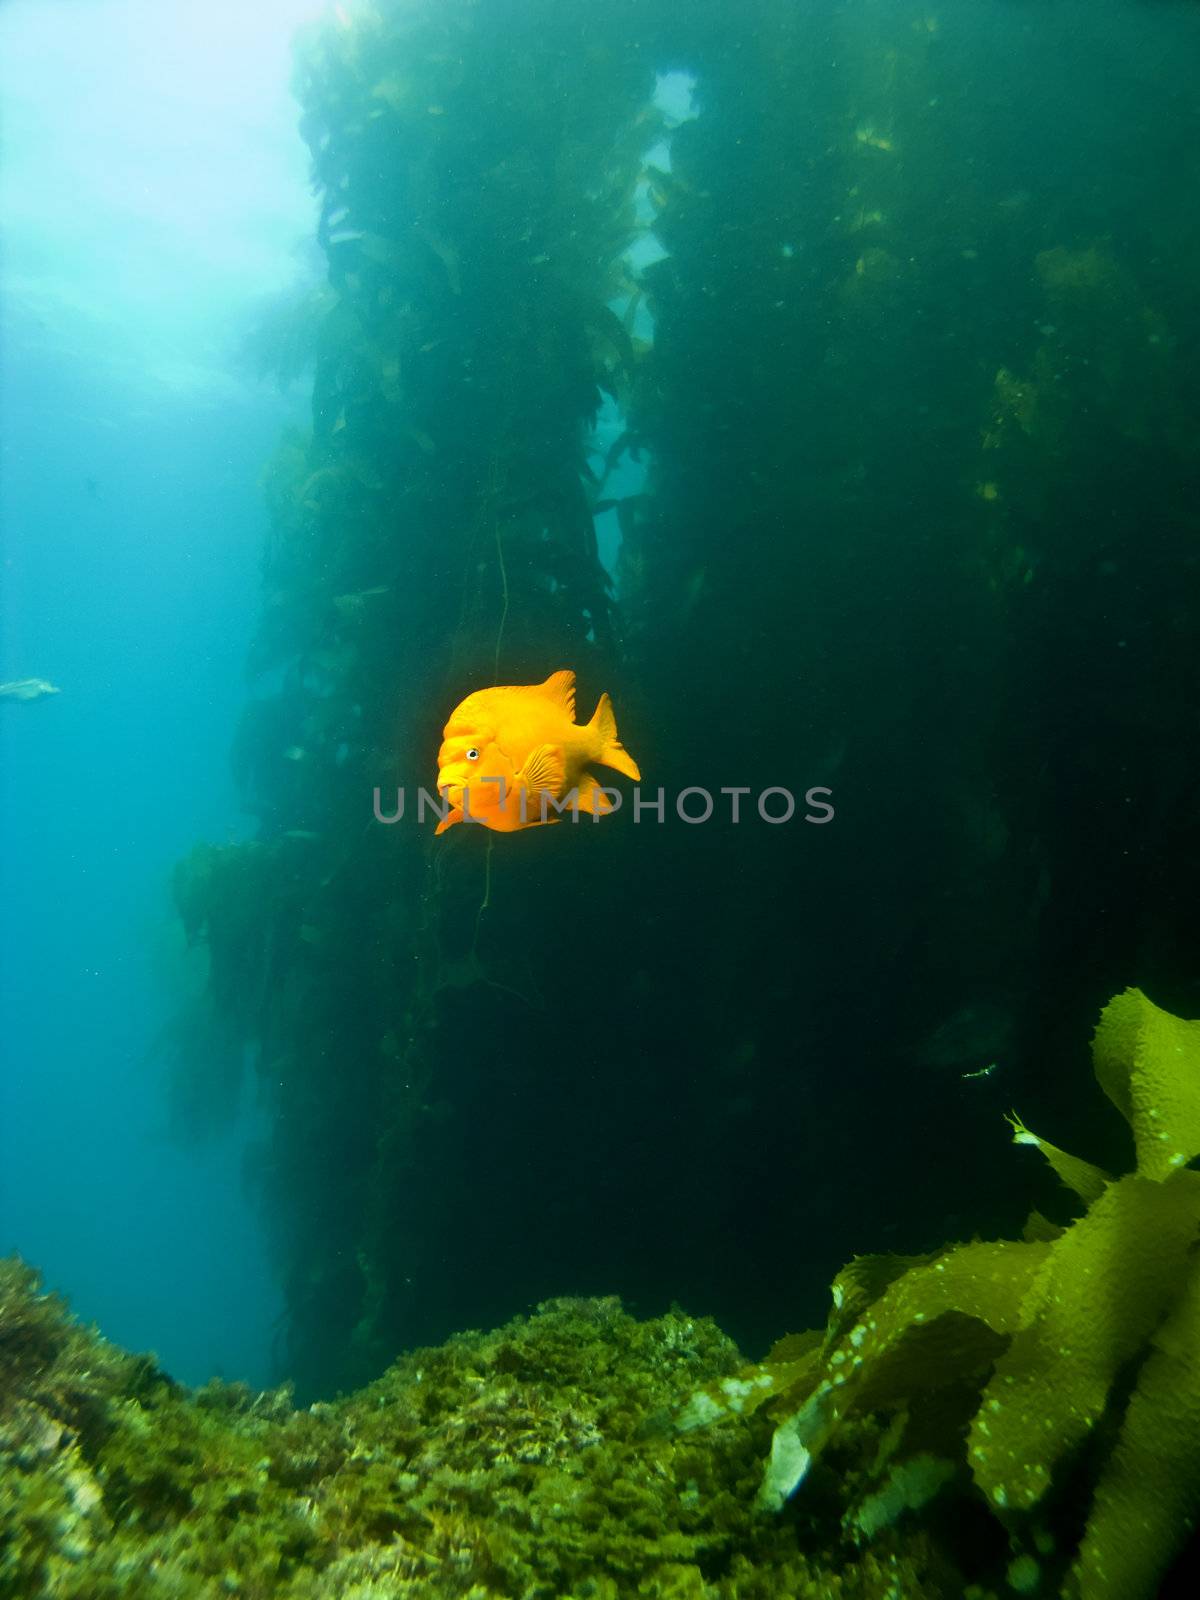 Garibaldi swimming out of the Kelp in Avalon Catalina